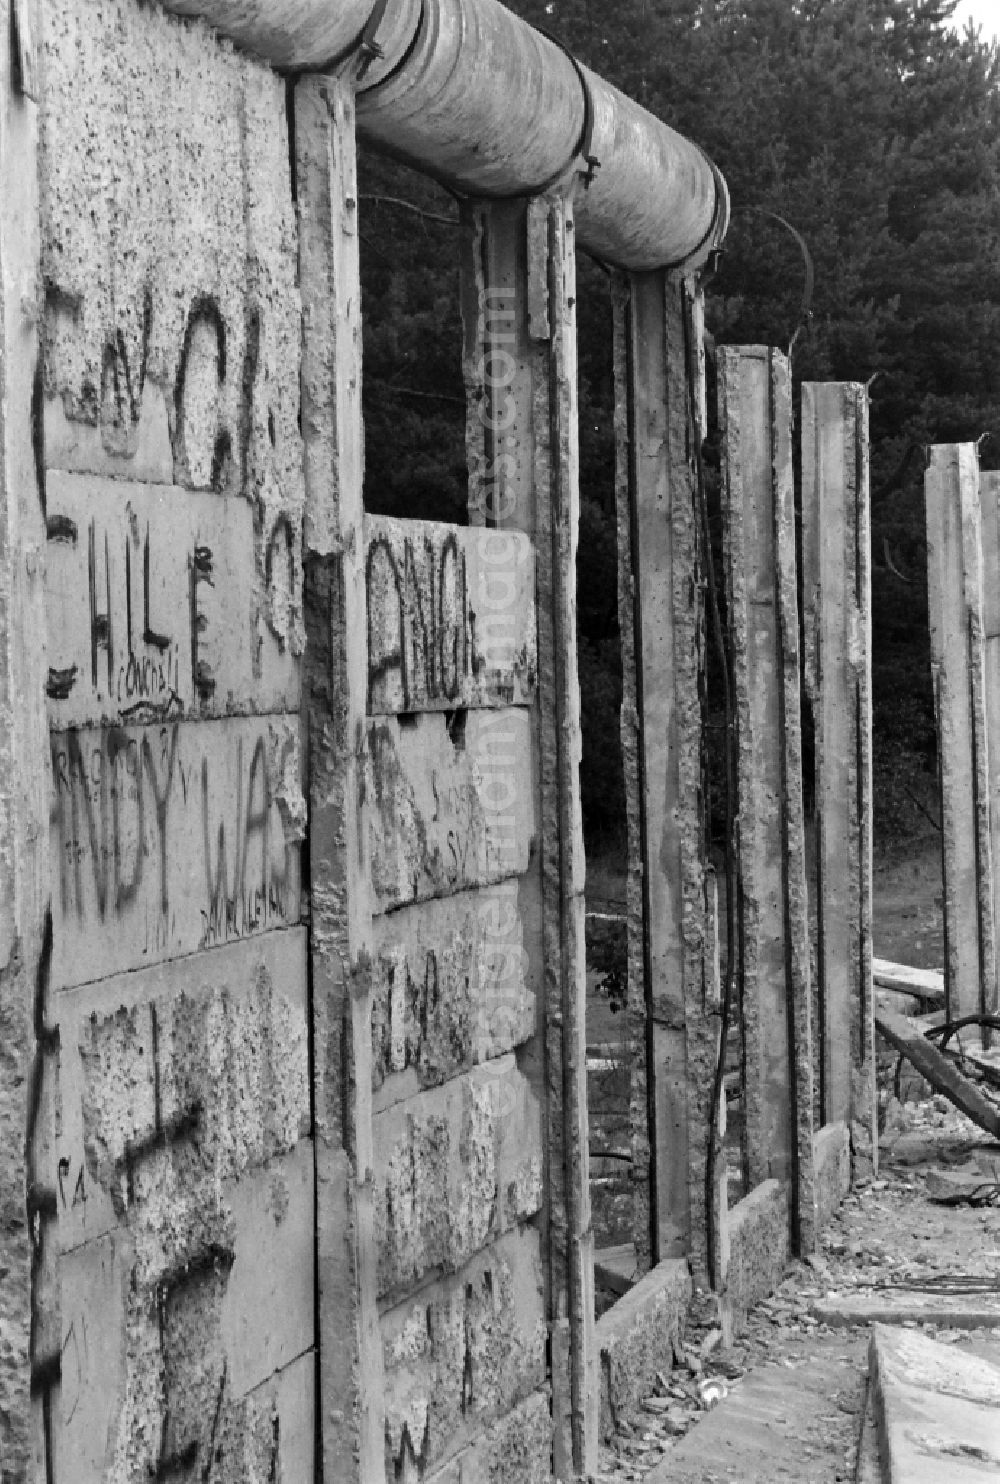 GDR photo archive: Berlin - Fragments of the decaying border fortifications and wall as well as security structures in the former border strip of the state border on a camp of the border troops in the district Steinstuecken in Berlin on the territory of the former GDR, German Democratic Republic